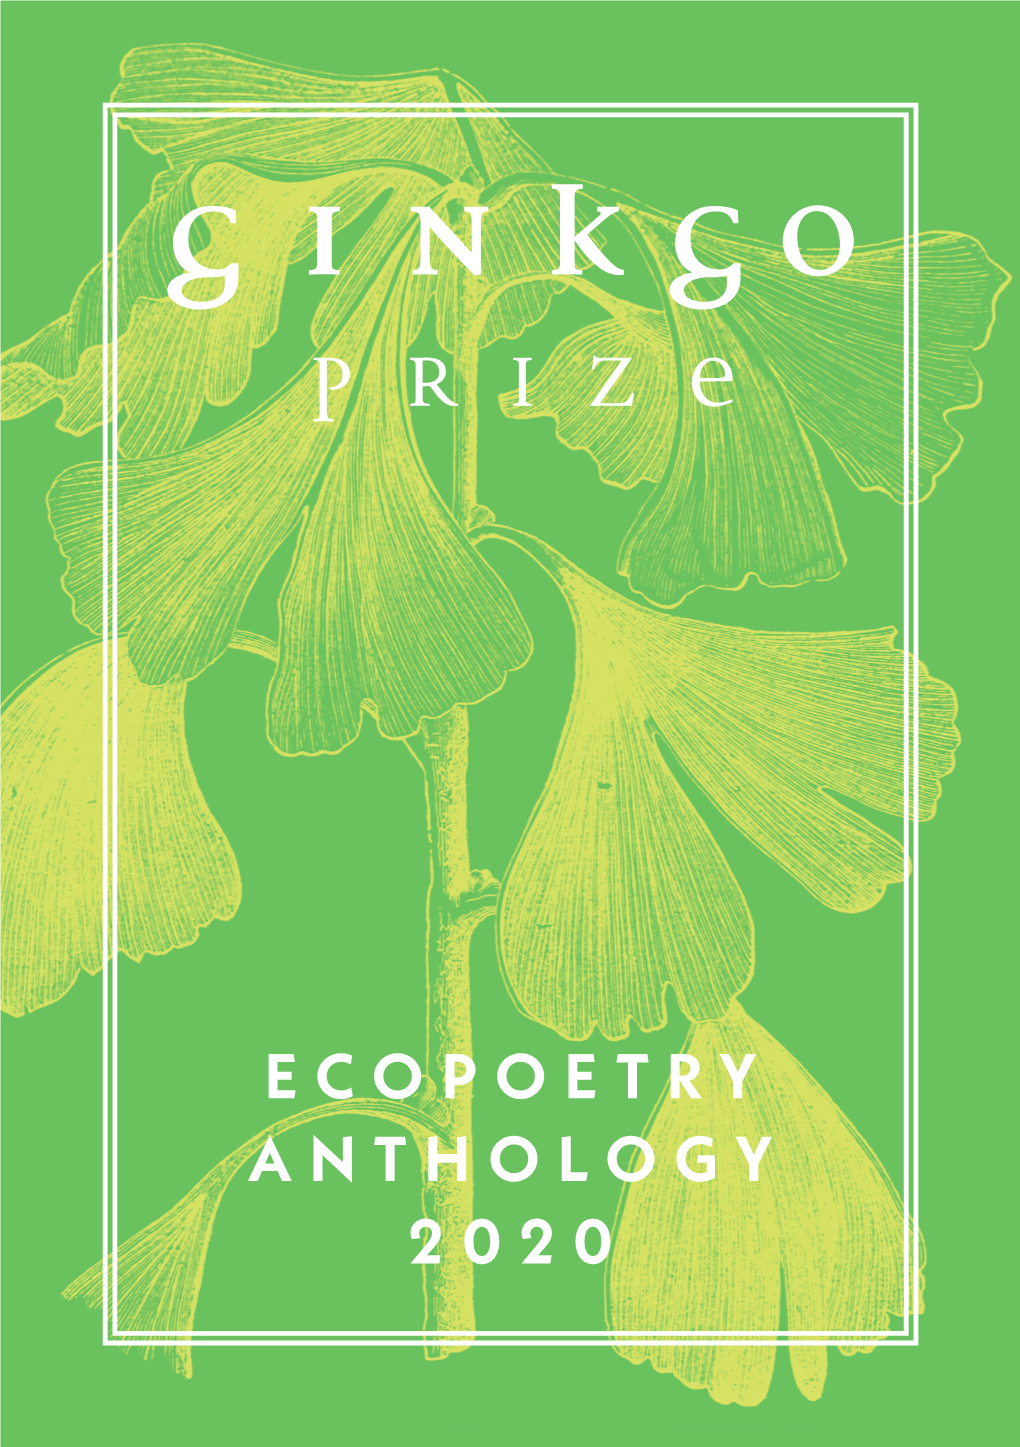 Ecopoetry Anthology 2020